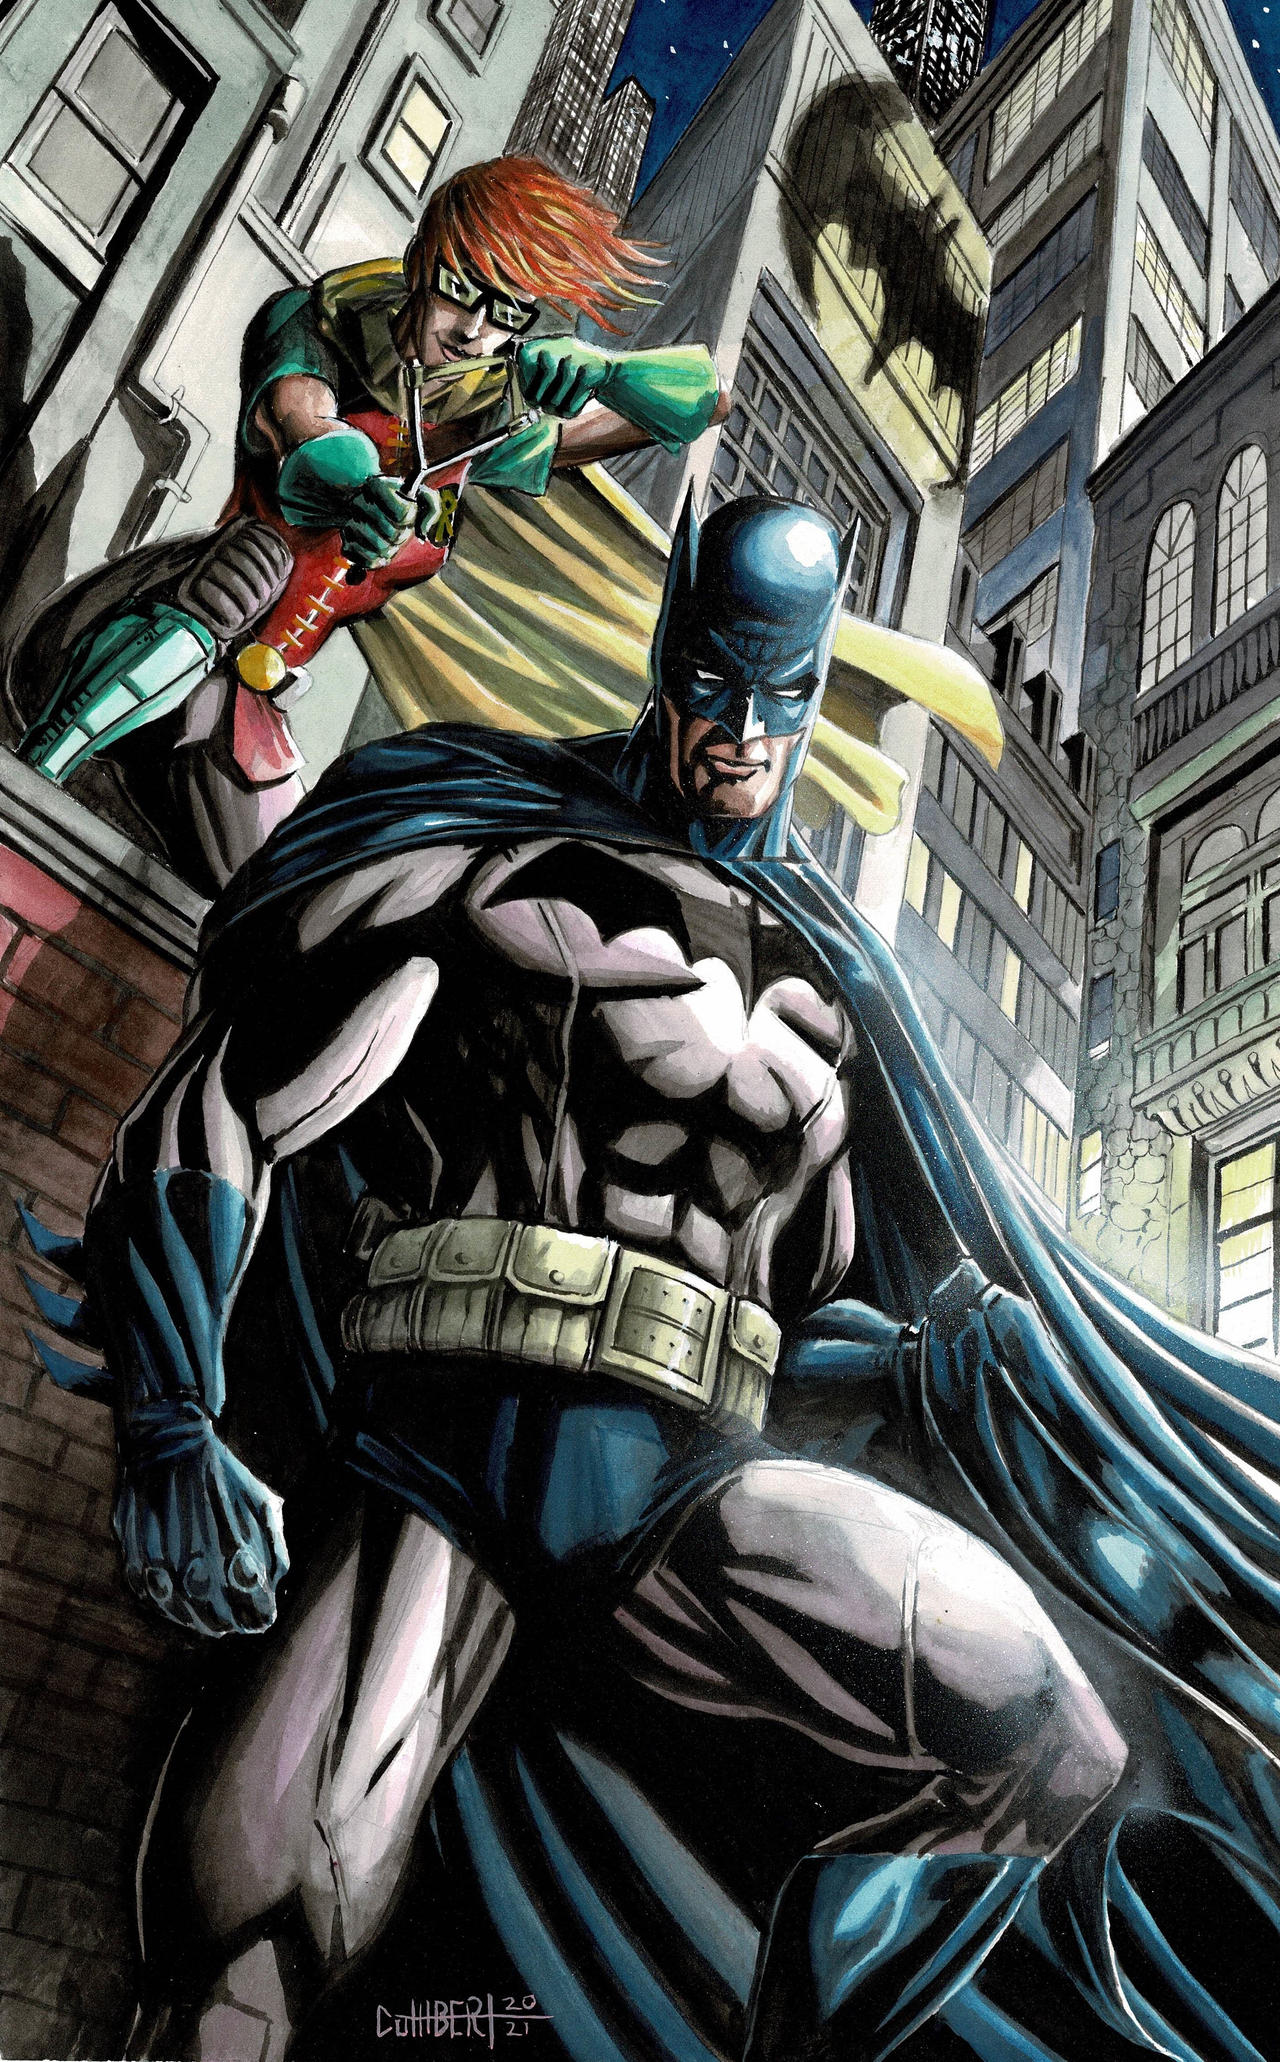 Batman and Carrie Kelly by tombungle on DeviantArt